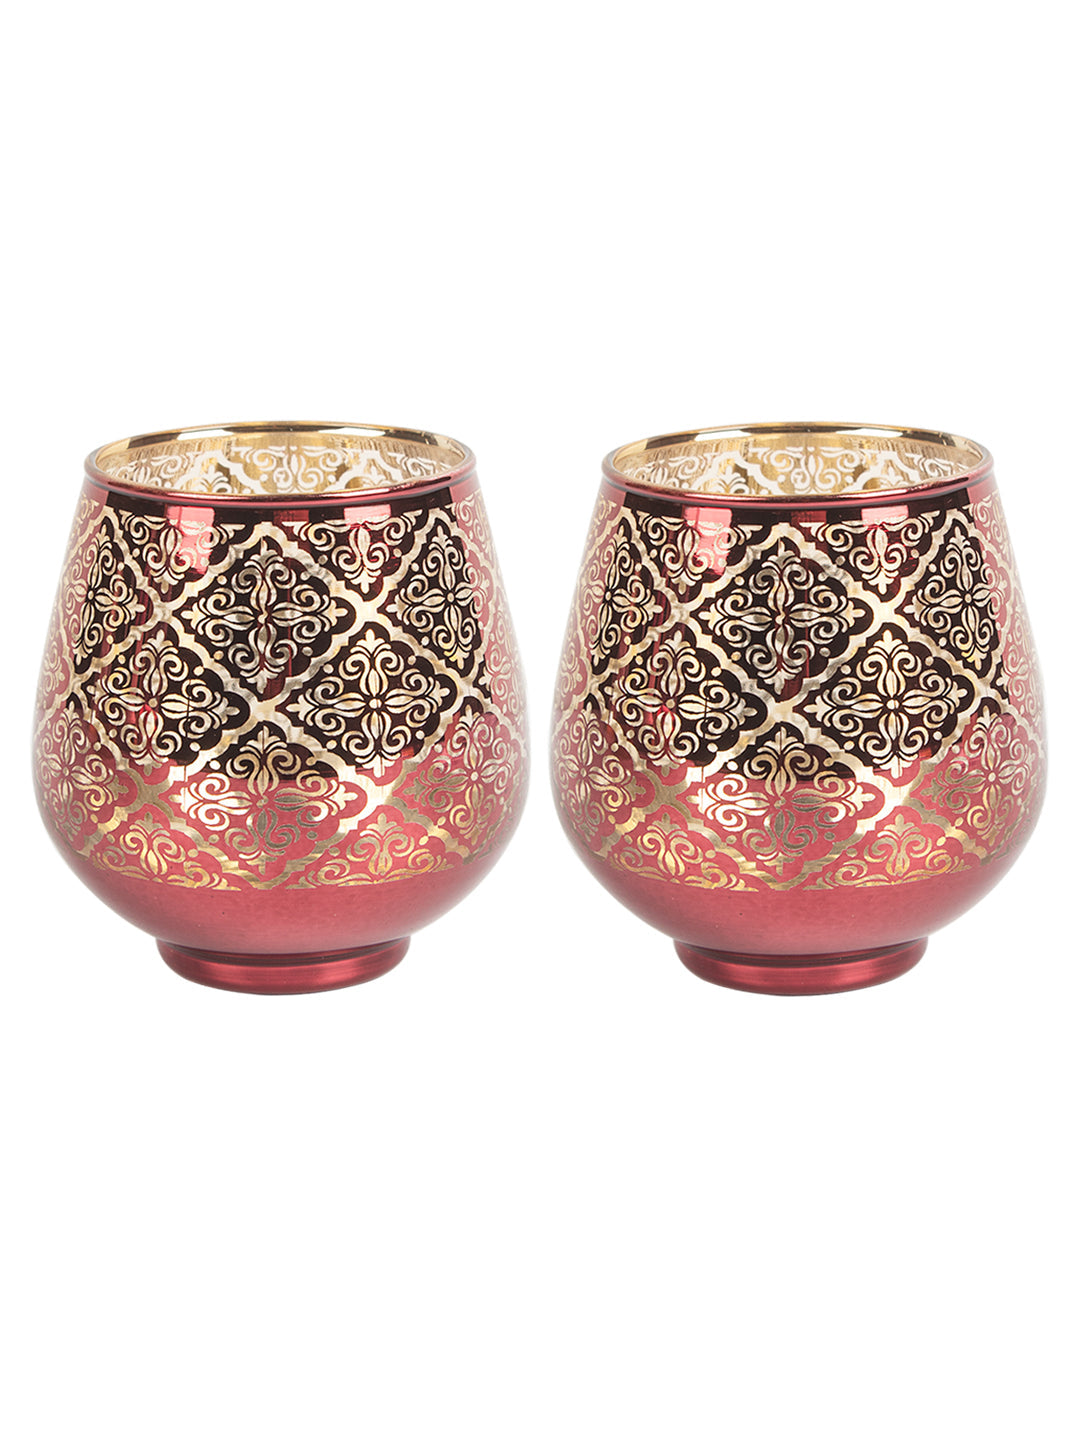 VON CASA Diwali Decorating Tealight Candle Holders Pack Of 2 Pcs